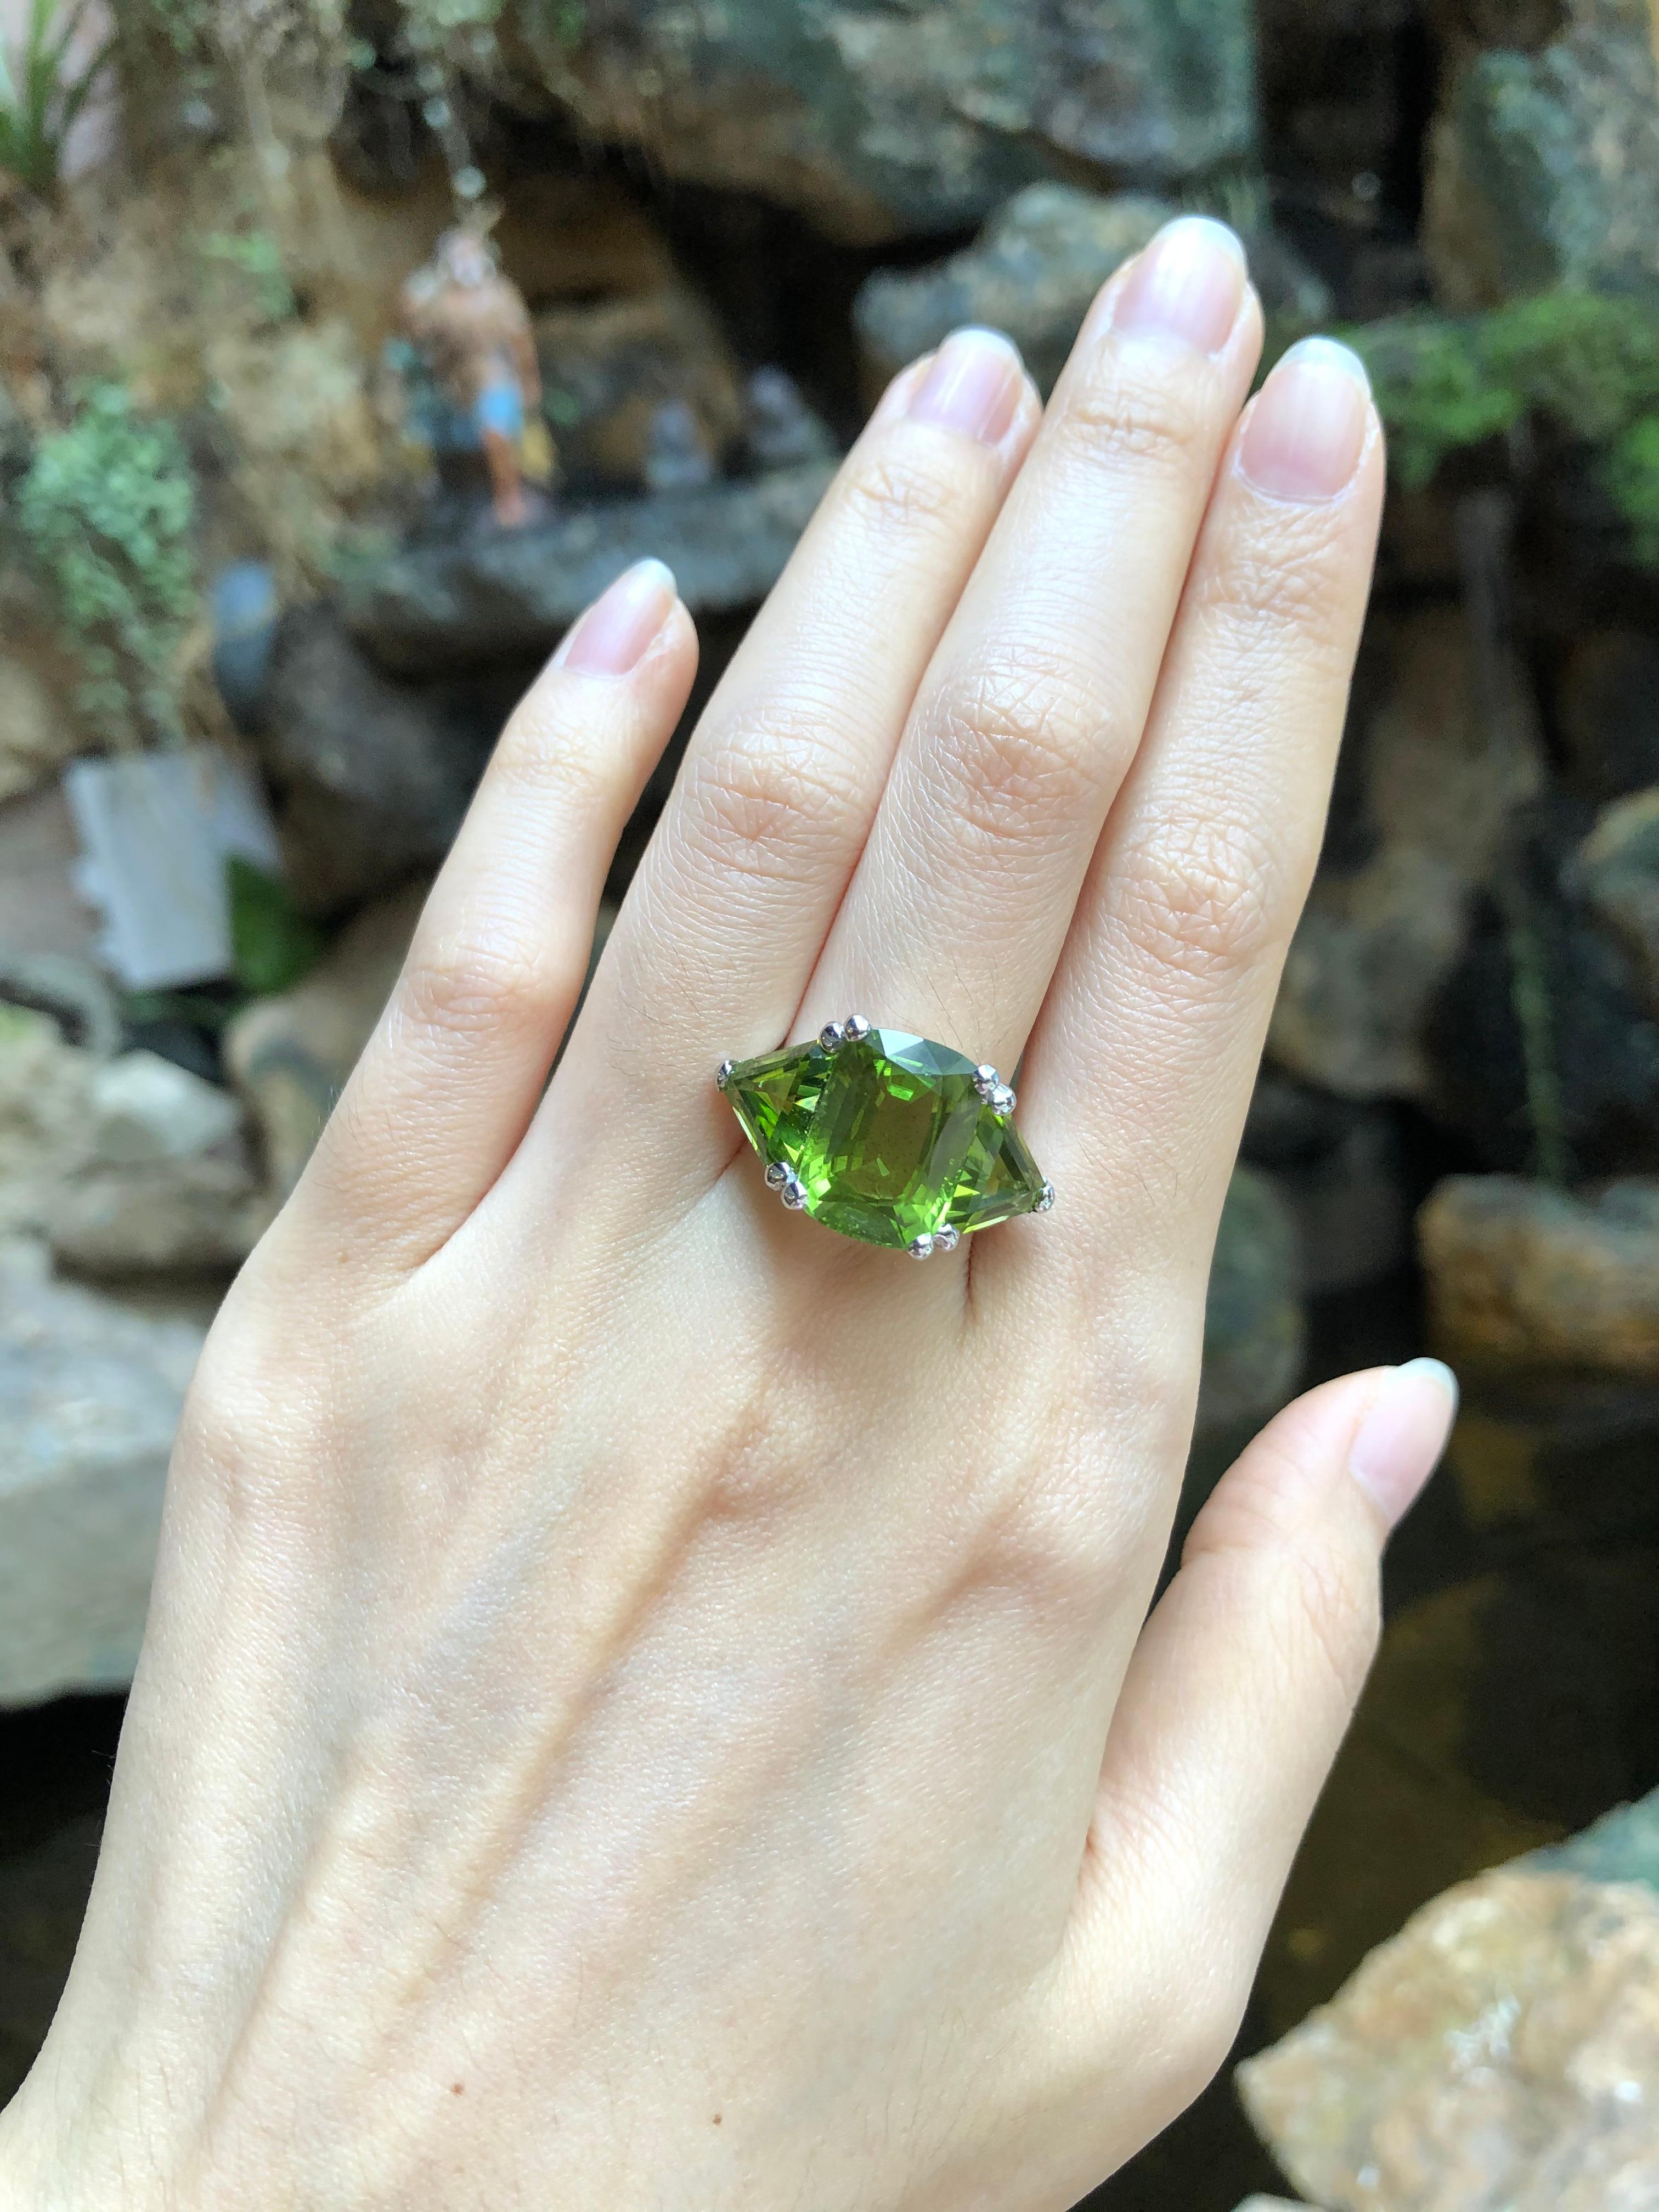 Peridot 9.21 carats with Peridot 6.32 carats Ring set in 18 Karat White Gold Settings

Width:  2.5 cm 
Length: 1.4 cm
Ring Size: 54
Total Weight: 11.98 grams

